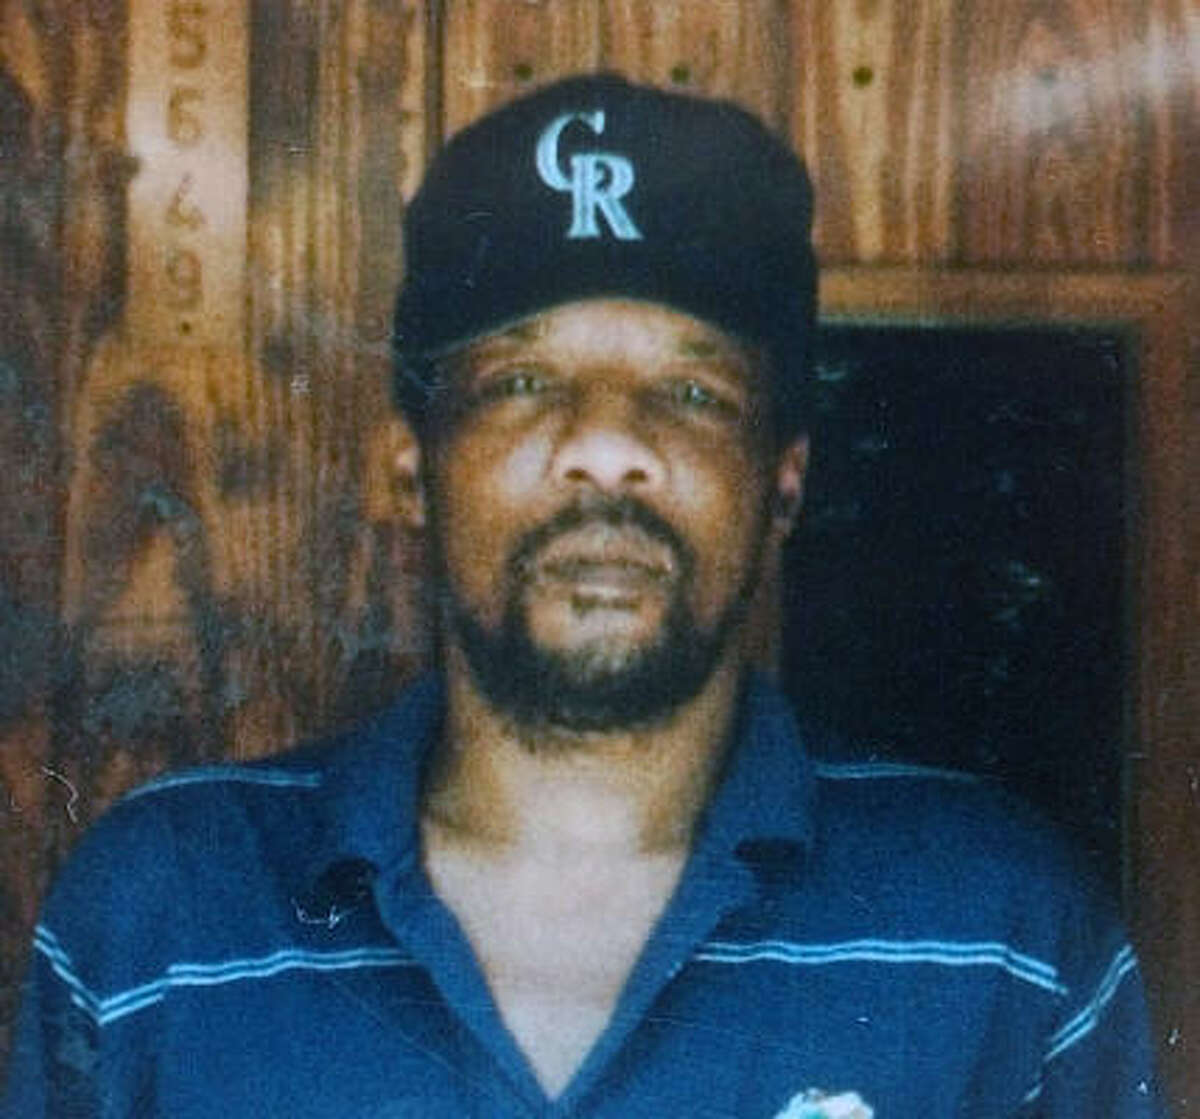 Three white men used a chain to tie James Byrd Jr.'s ankles to a truck's rear bumper, zigzagging him for 3.08 miles